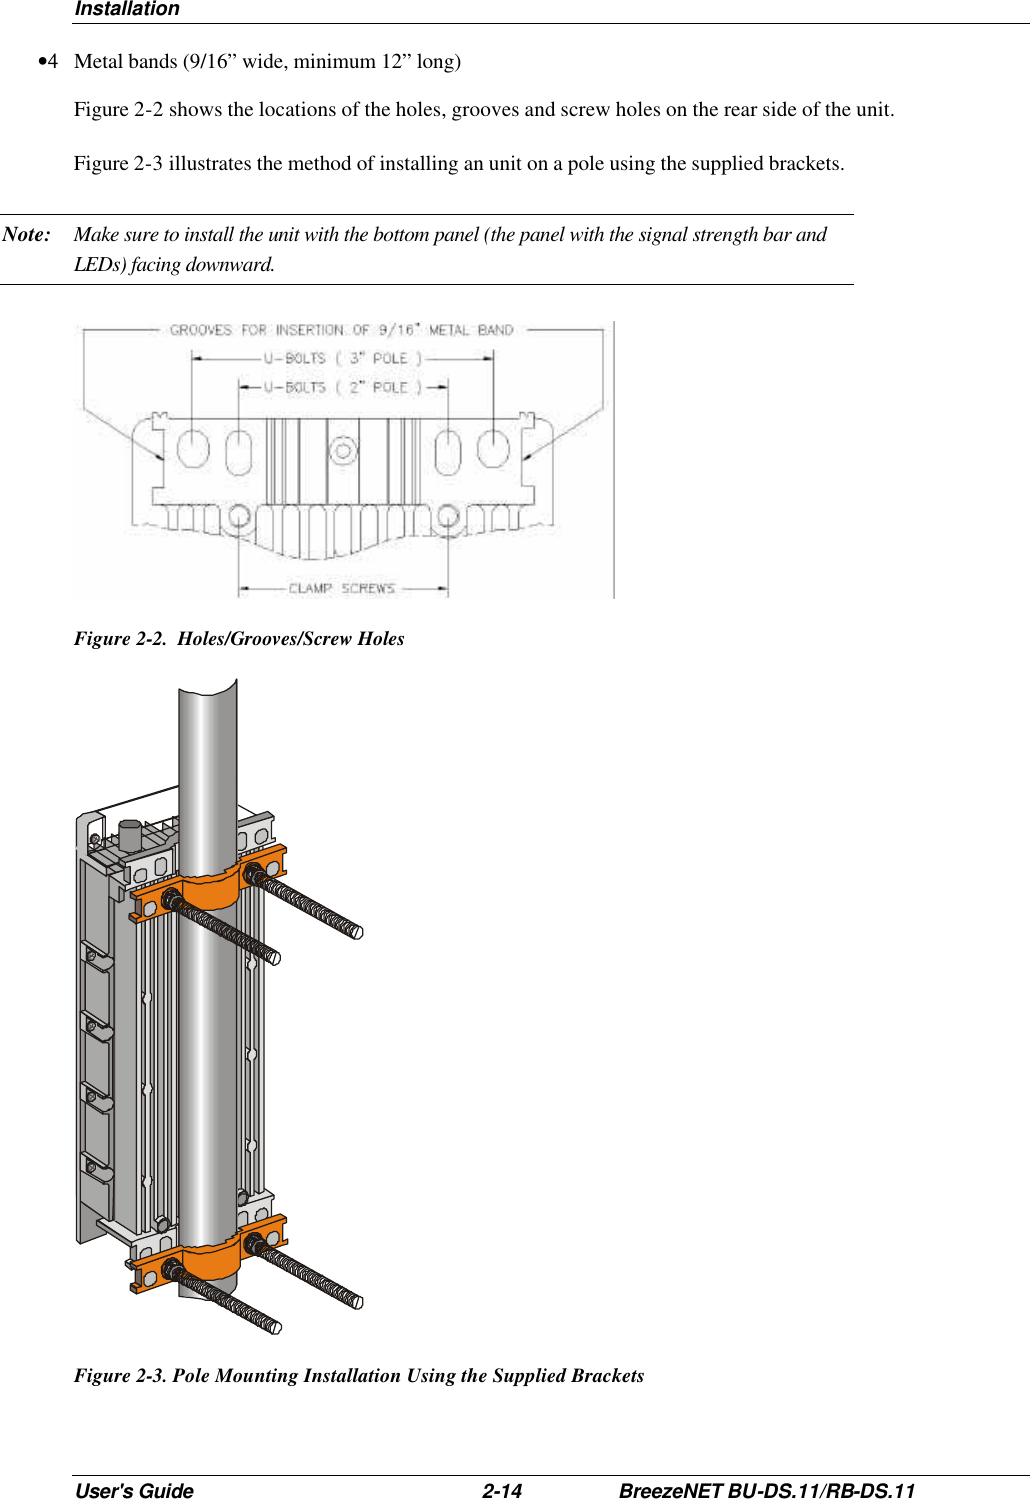 Installation User&apos;s Guide 2-14 BreezeNET BU-DS.11/RB-DS.11 •4 Metal bands (9/16” wide, minimum 12” long) Figure 2-2 shows the locations of the holes, grooves and screw holes on the rear side of the unit. Figure 2-3 illustrates the method of installing an unit on a pole using the supplied brackets. Note: Make sure to install the unit with the bottom panel (the panel with the signal strength bar and LEDs) facing downward.   Figure 2-2.  Holes/Grooves/Screw Holes   Figure 2-3. Pole Mounting Installation Using the Supplied Brackets 